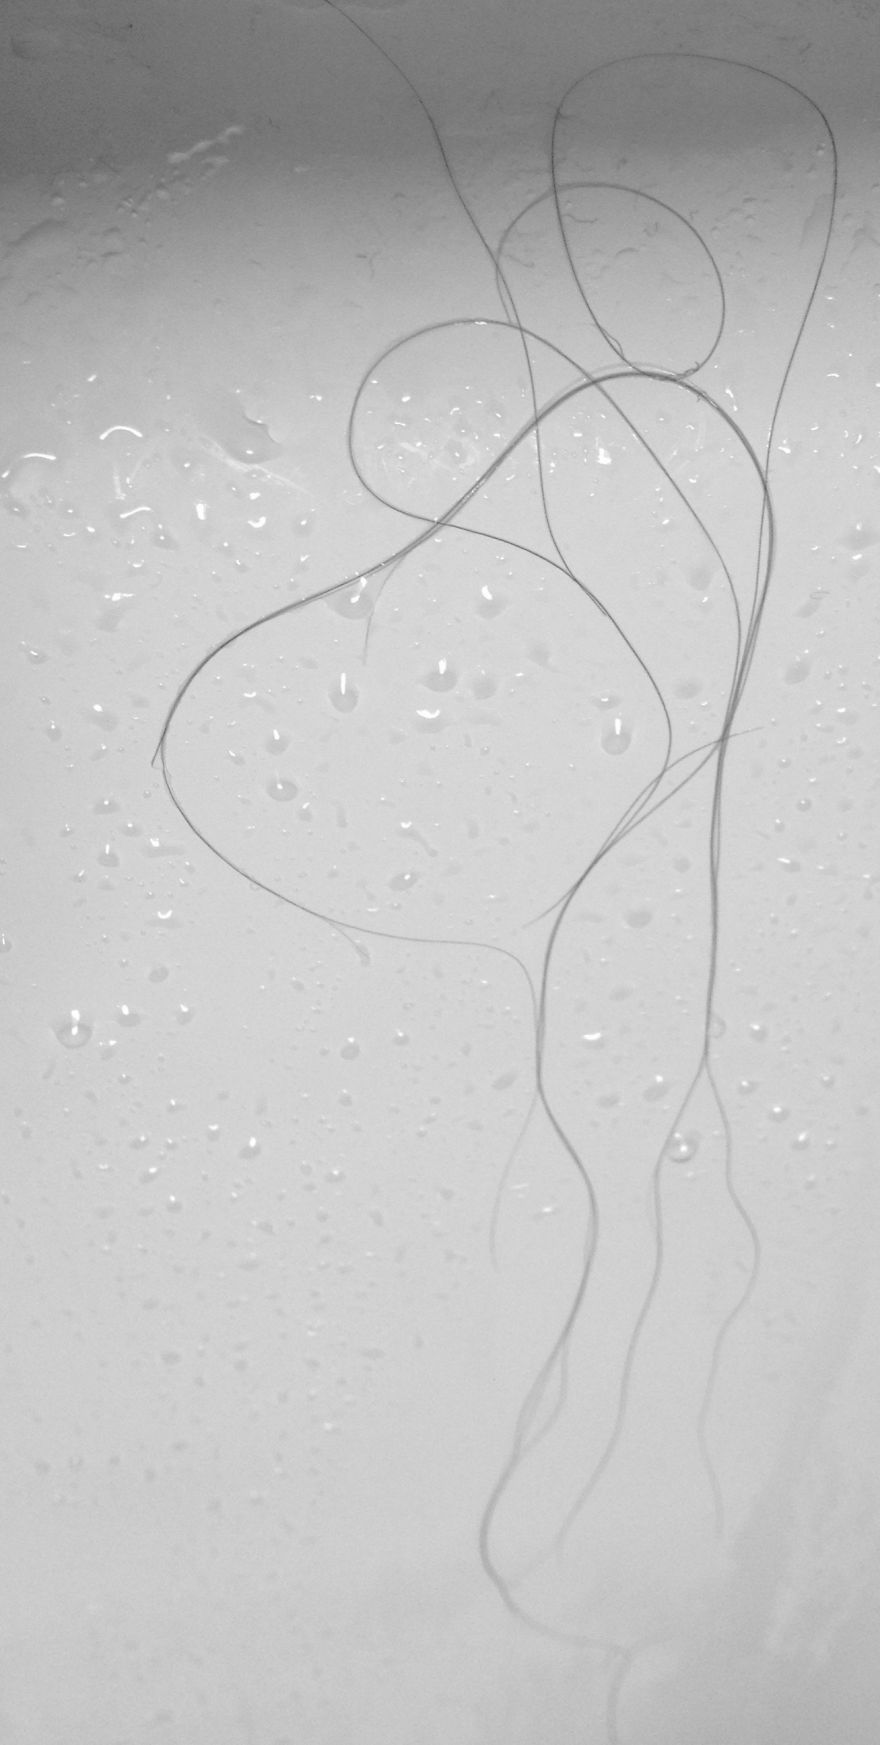 Simple, Powerful Line Drawings: Artist Draws Inspiration In The Shower